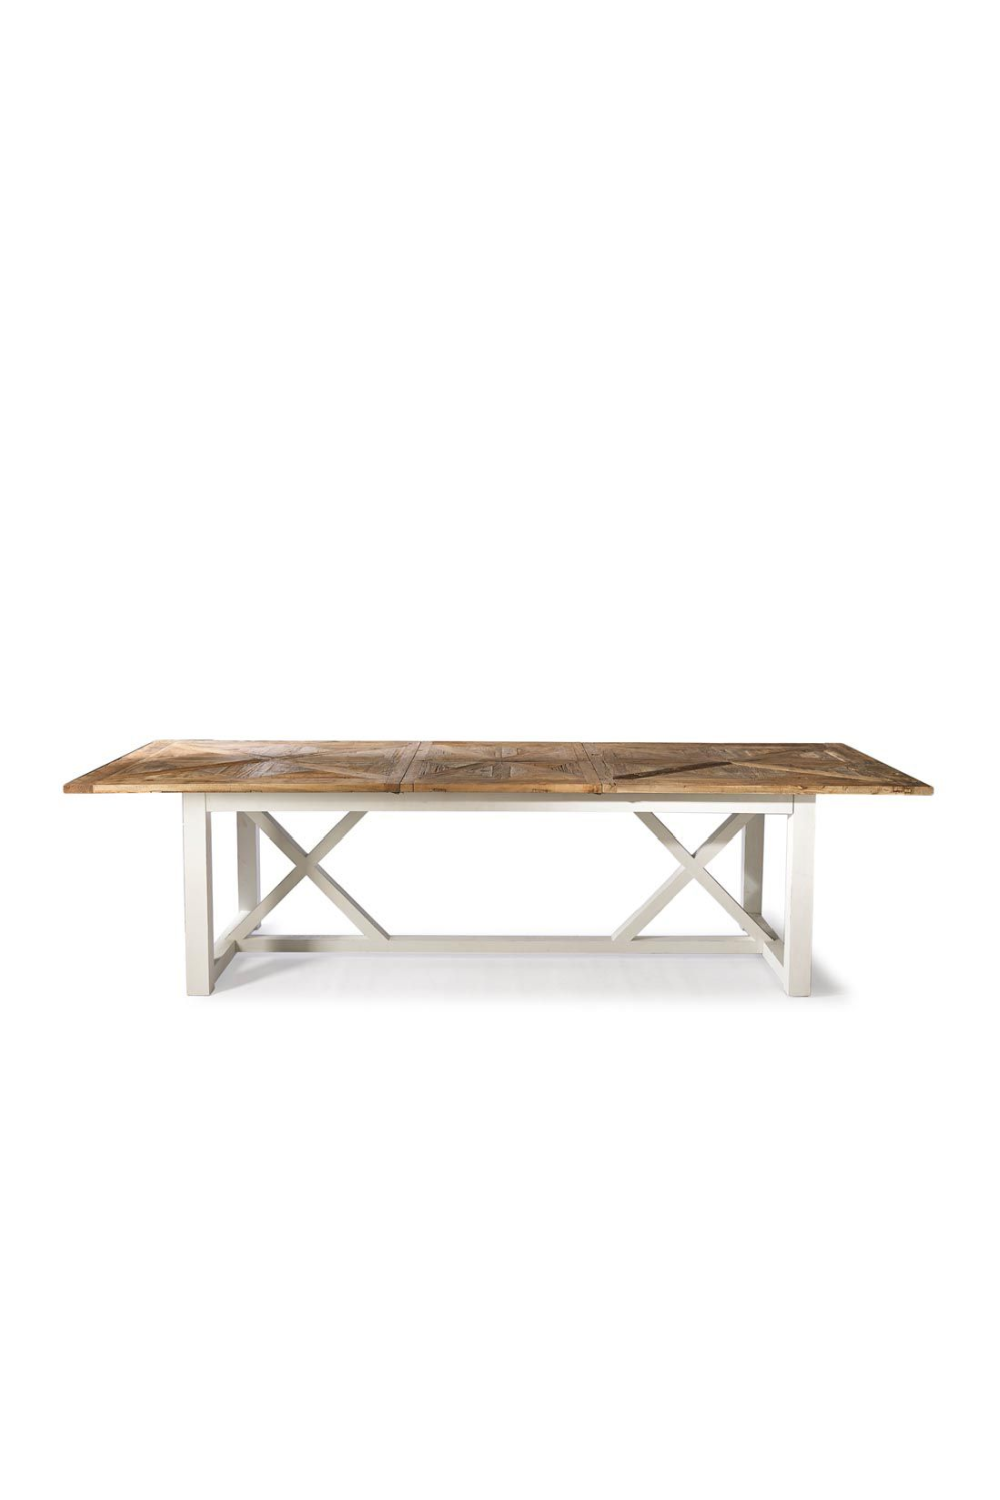 Uitgaan D.w.z Schaduw Classic Extendable Dining Table | Rivièra Maison | Wood Furniture